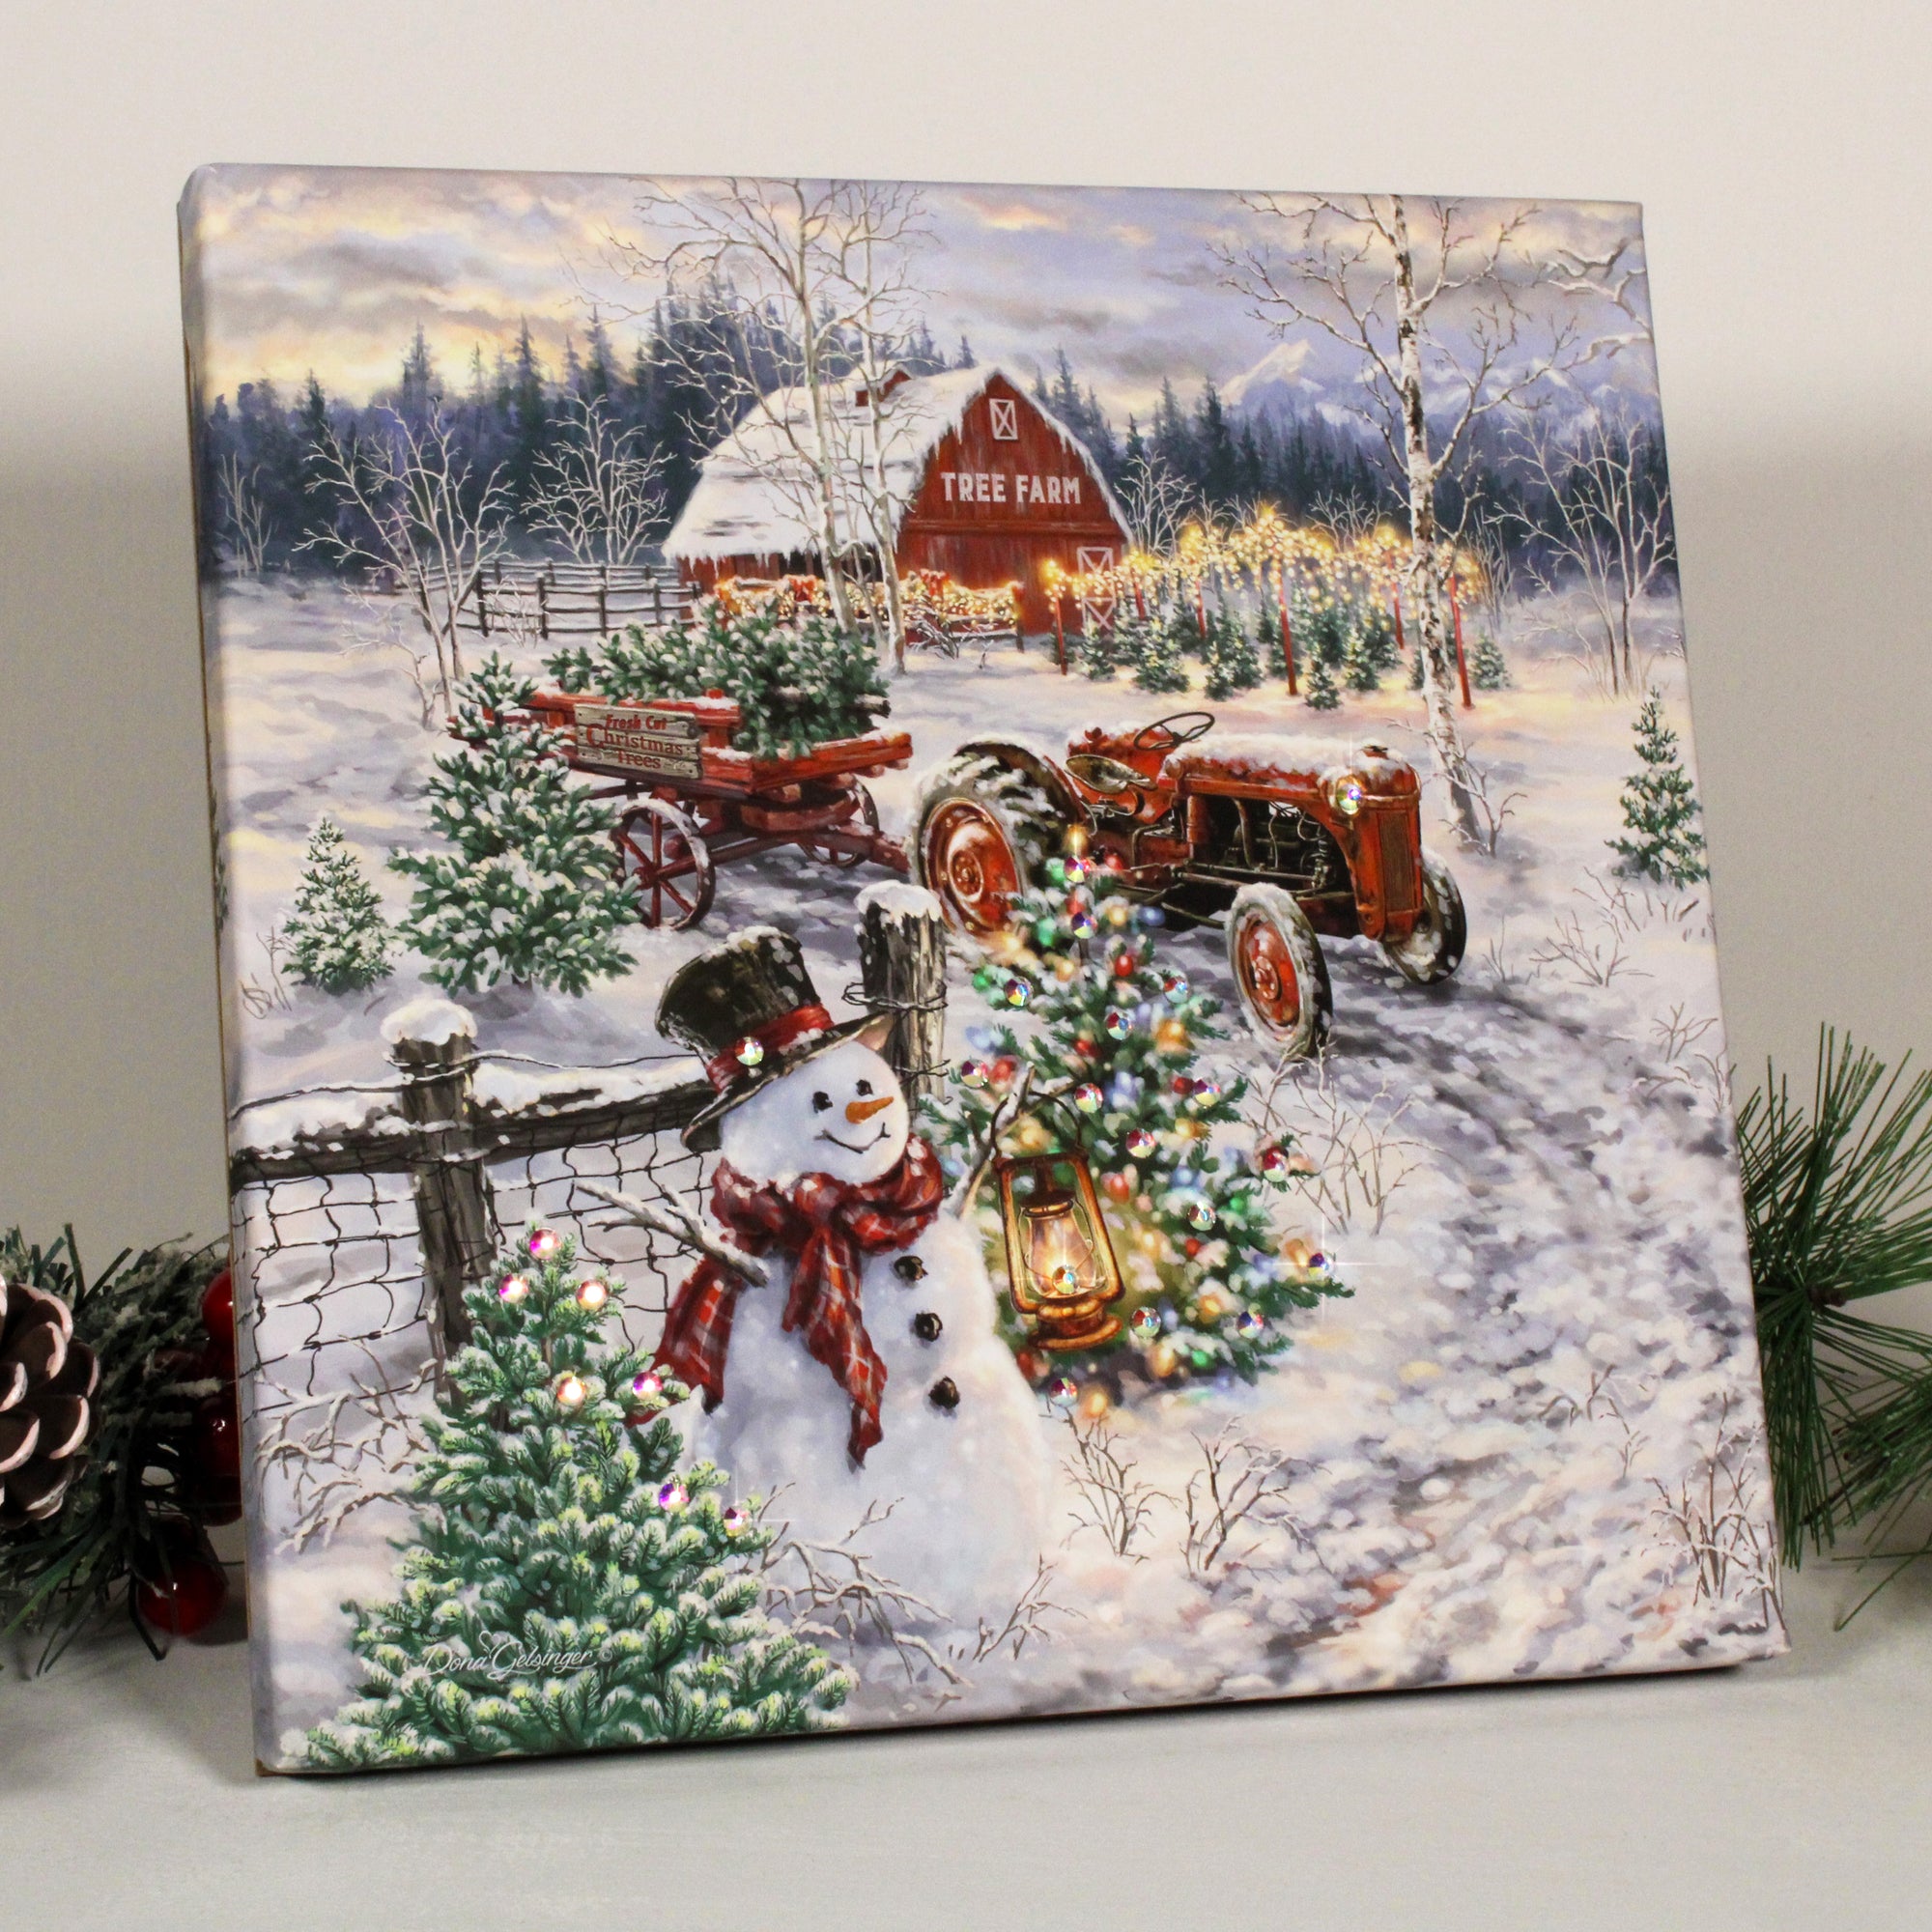 This beautiful artwork captures the essence of winter wonderland with a charming snowman, a glowing Christmas tree, and a rustic red barn. The snow-covered fence and trailer full of fresh-cut trees add to the enchanting scene, making it a perfect addition to your holiday decor.